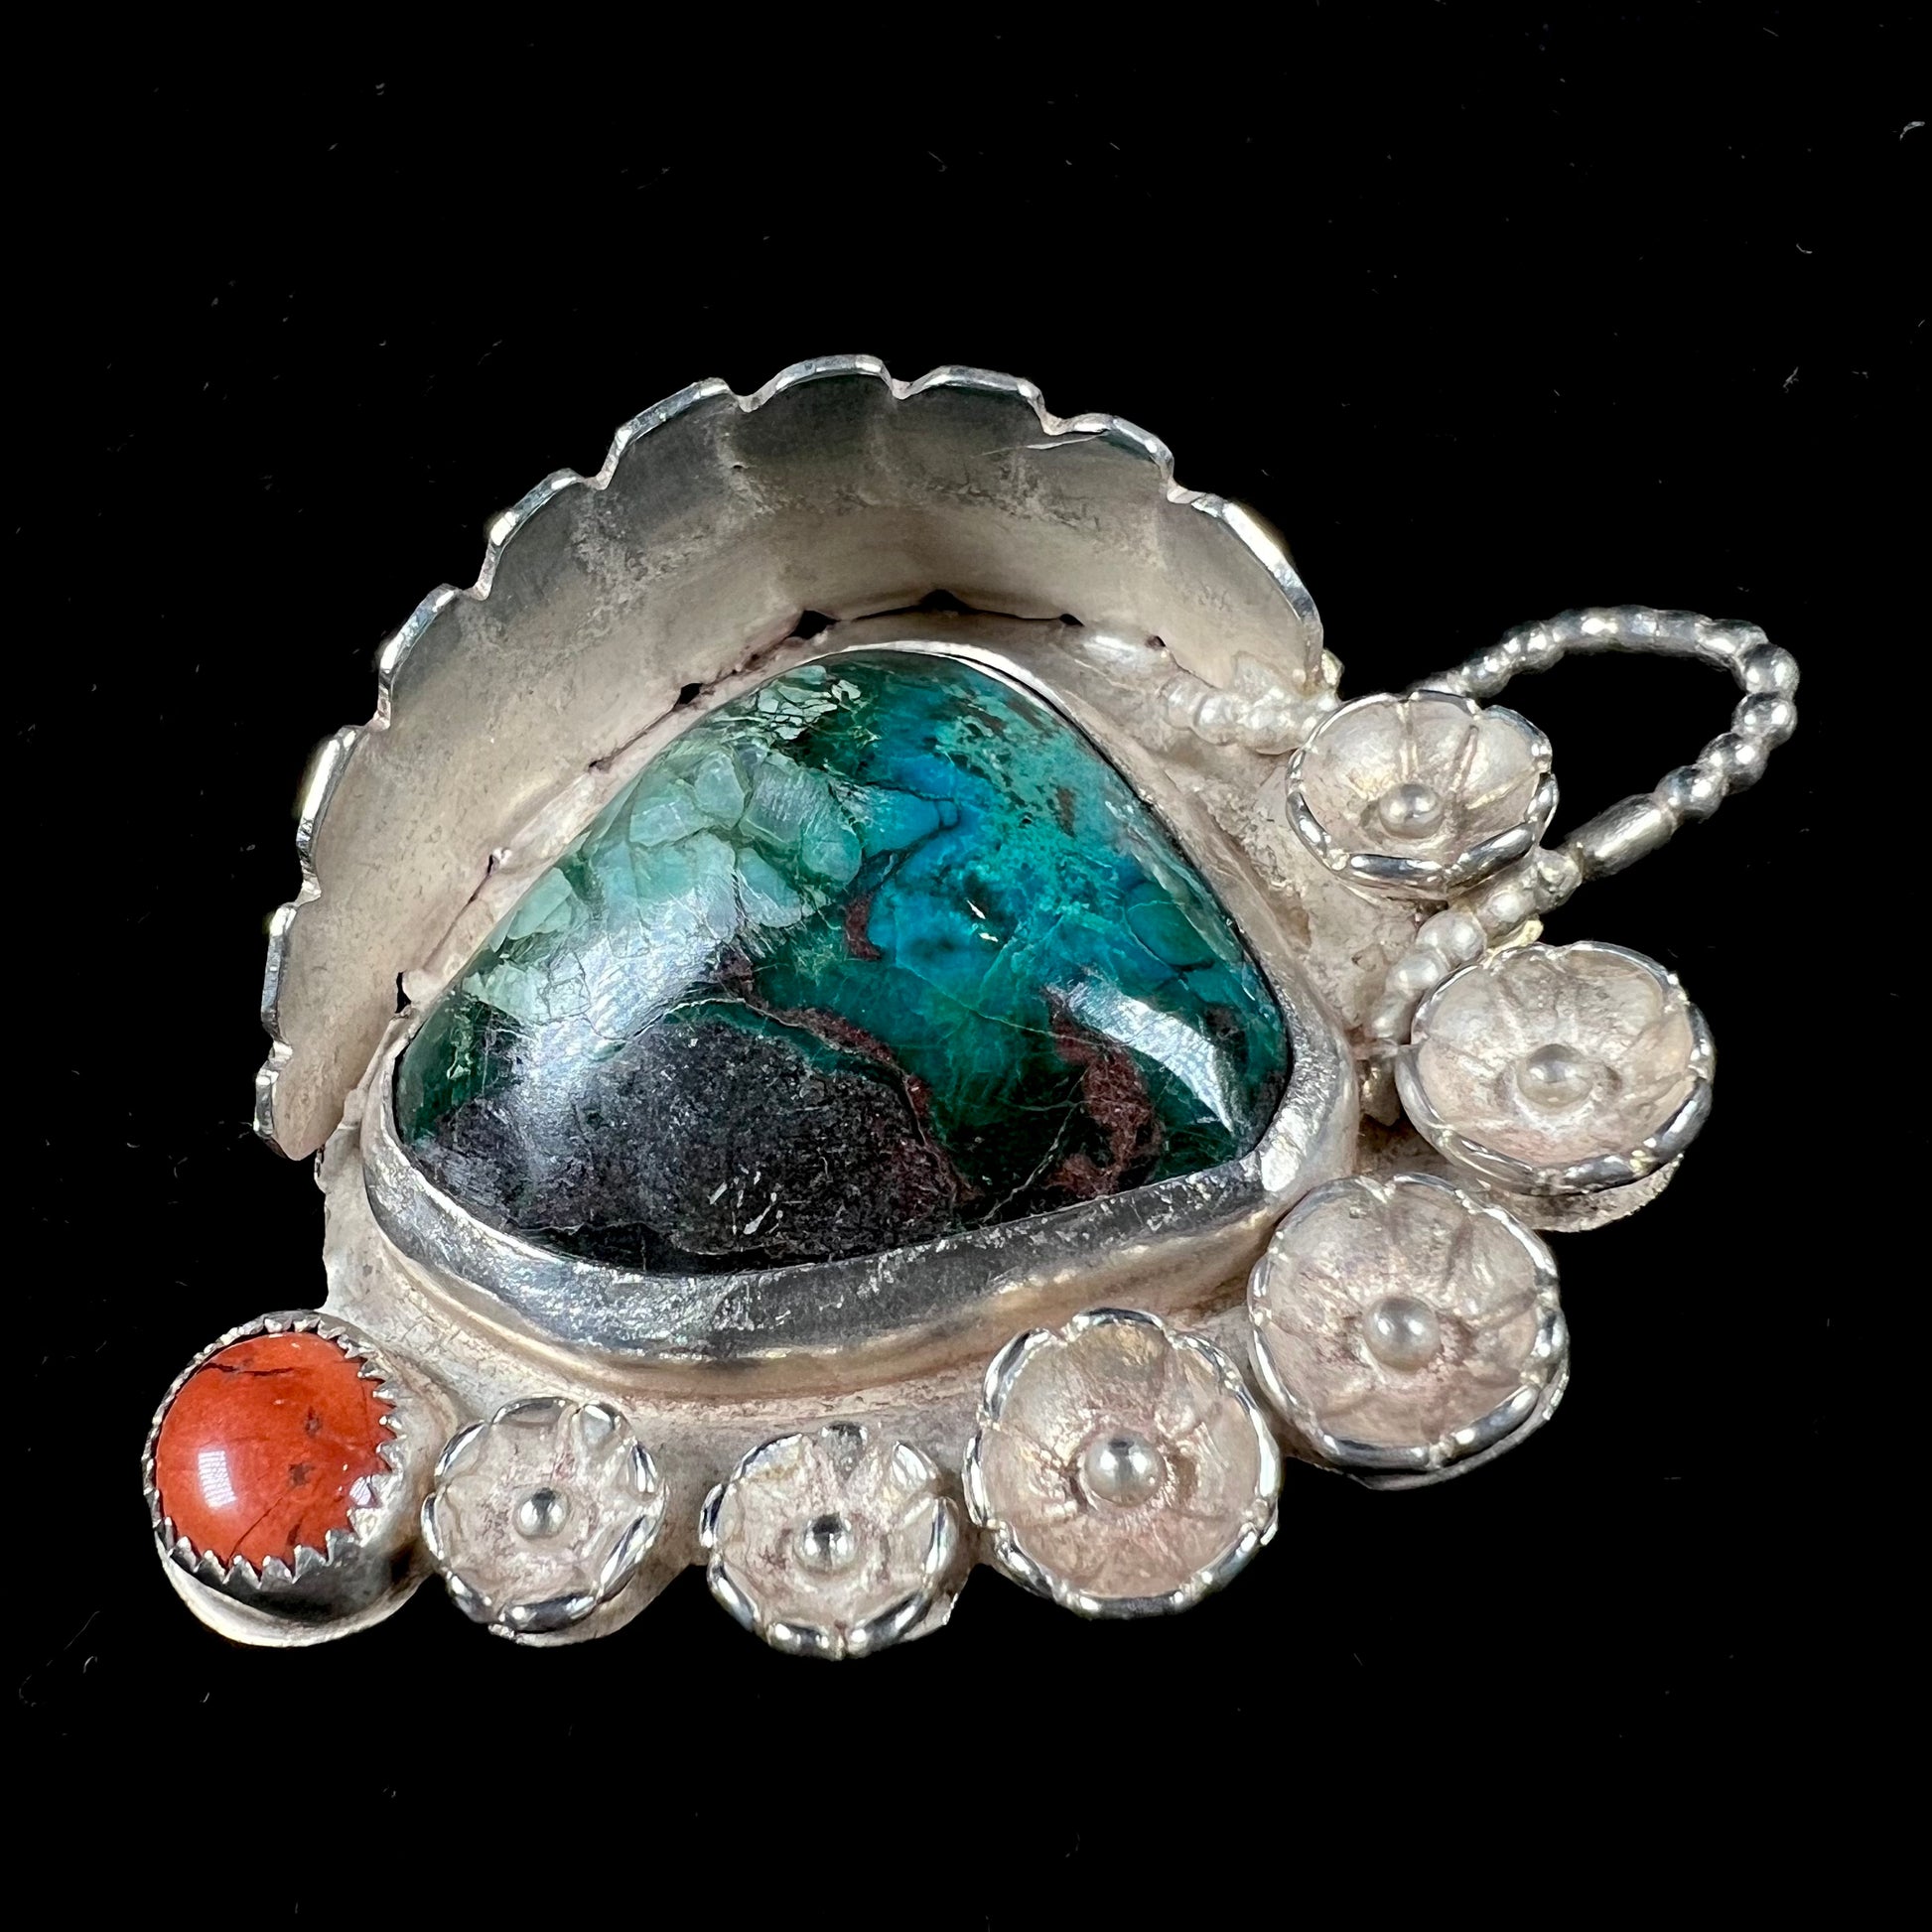 A sterling silver Navajo-style pendant set with chrysocolla and red jasper stones.